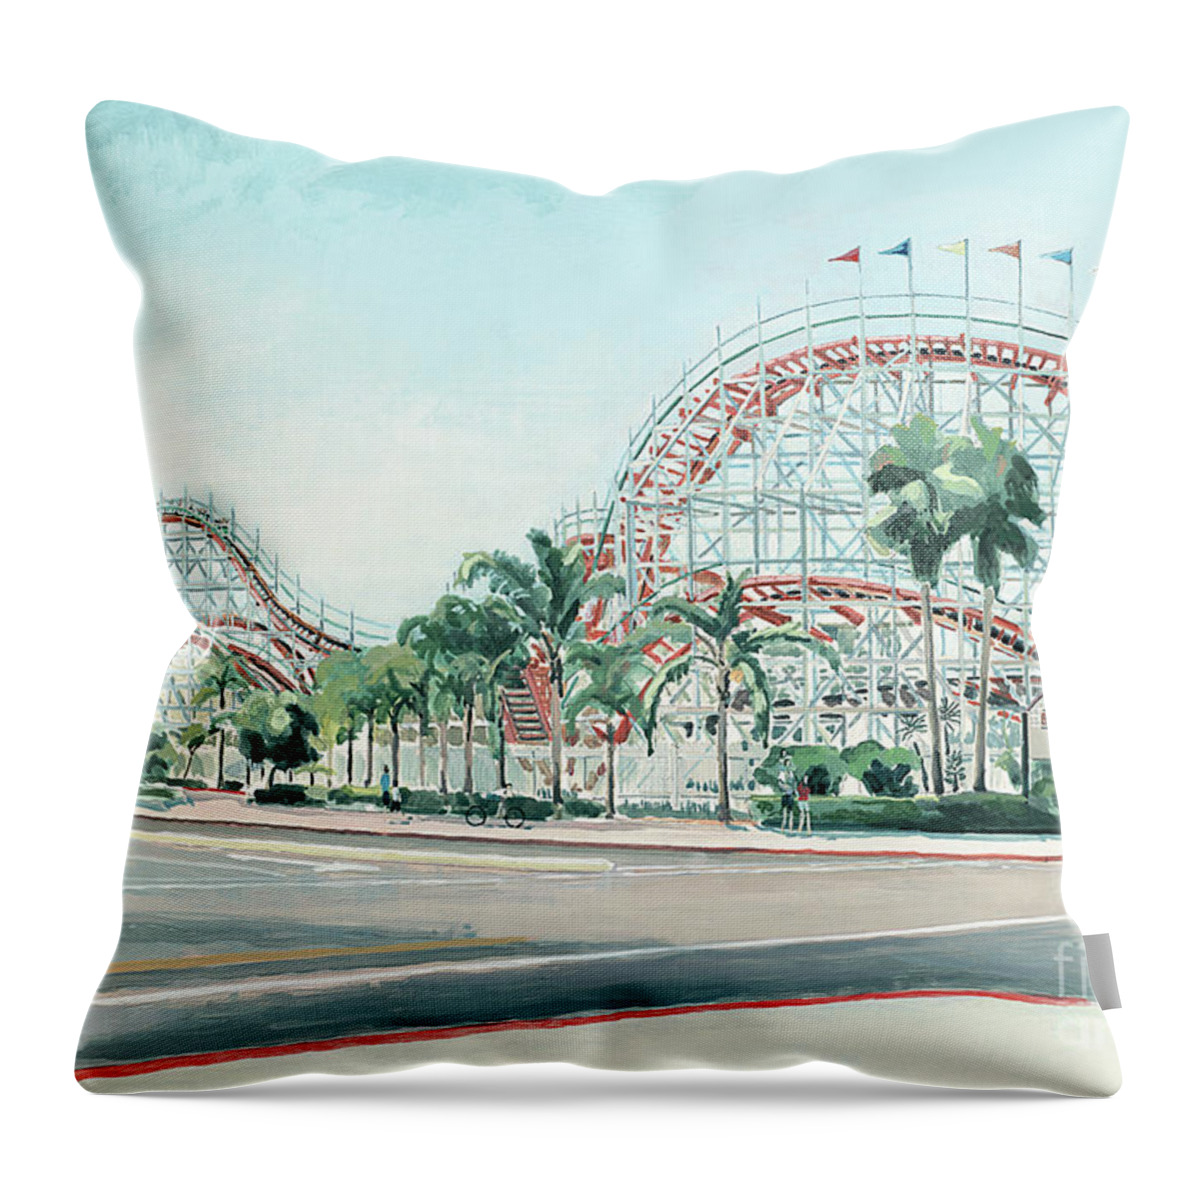 Giant Dipper Throw Pillow featuring the painting Giant Dipper Belmont Park Mission Beach San Diego California by Paul Strahm